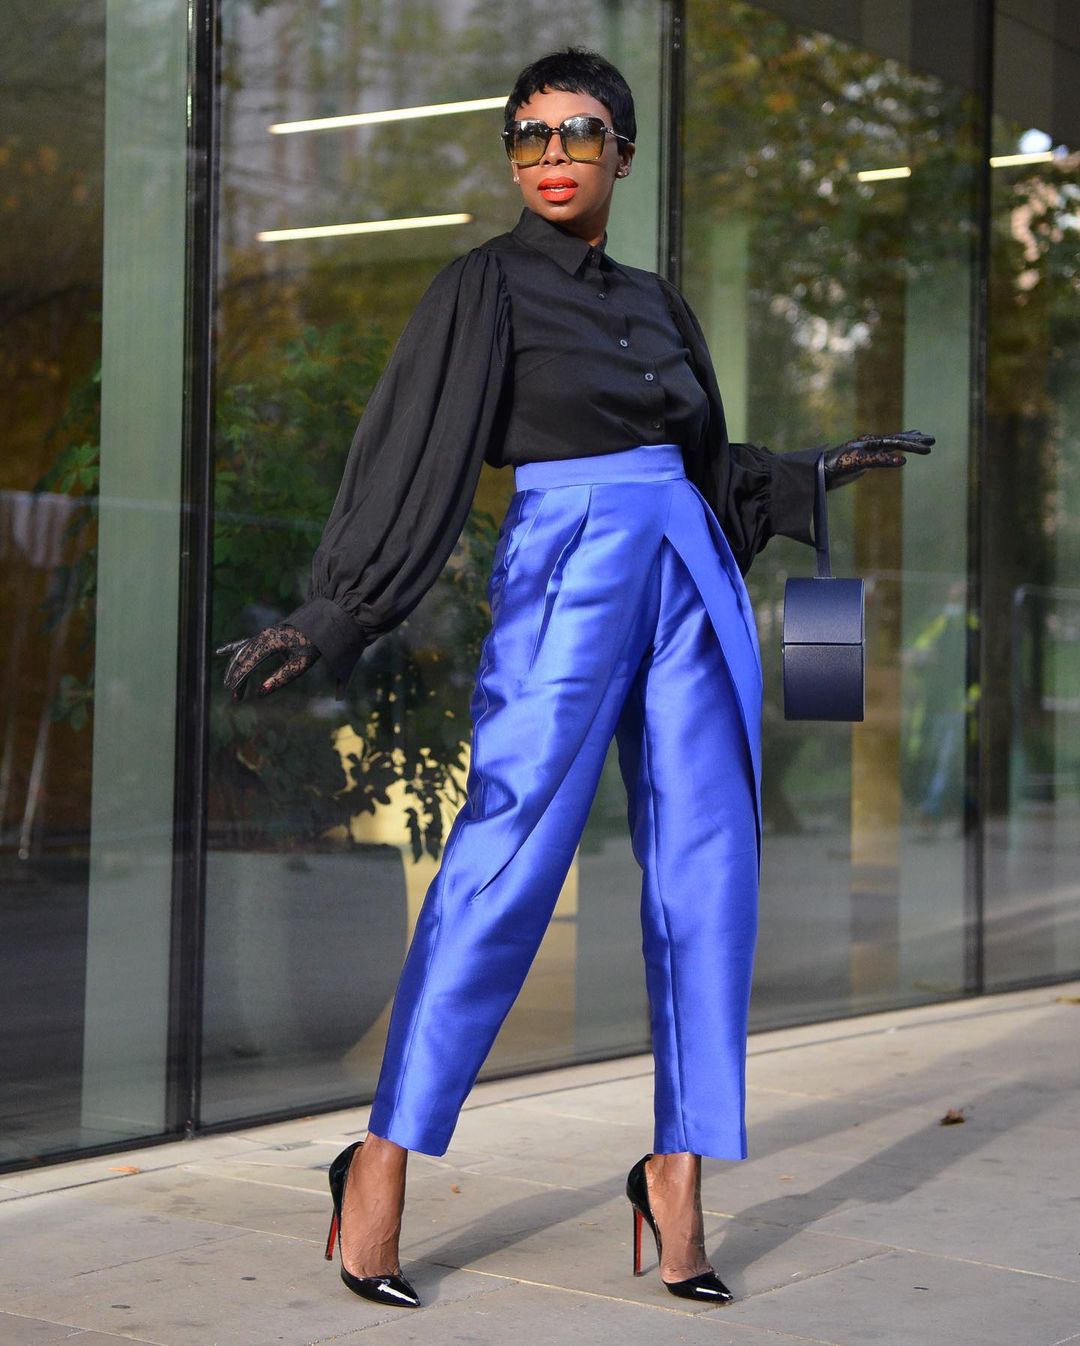 Prepare To Be Inspired By Sade Akinosho's Exquisite Style – 7 Days A ...